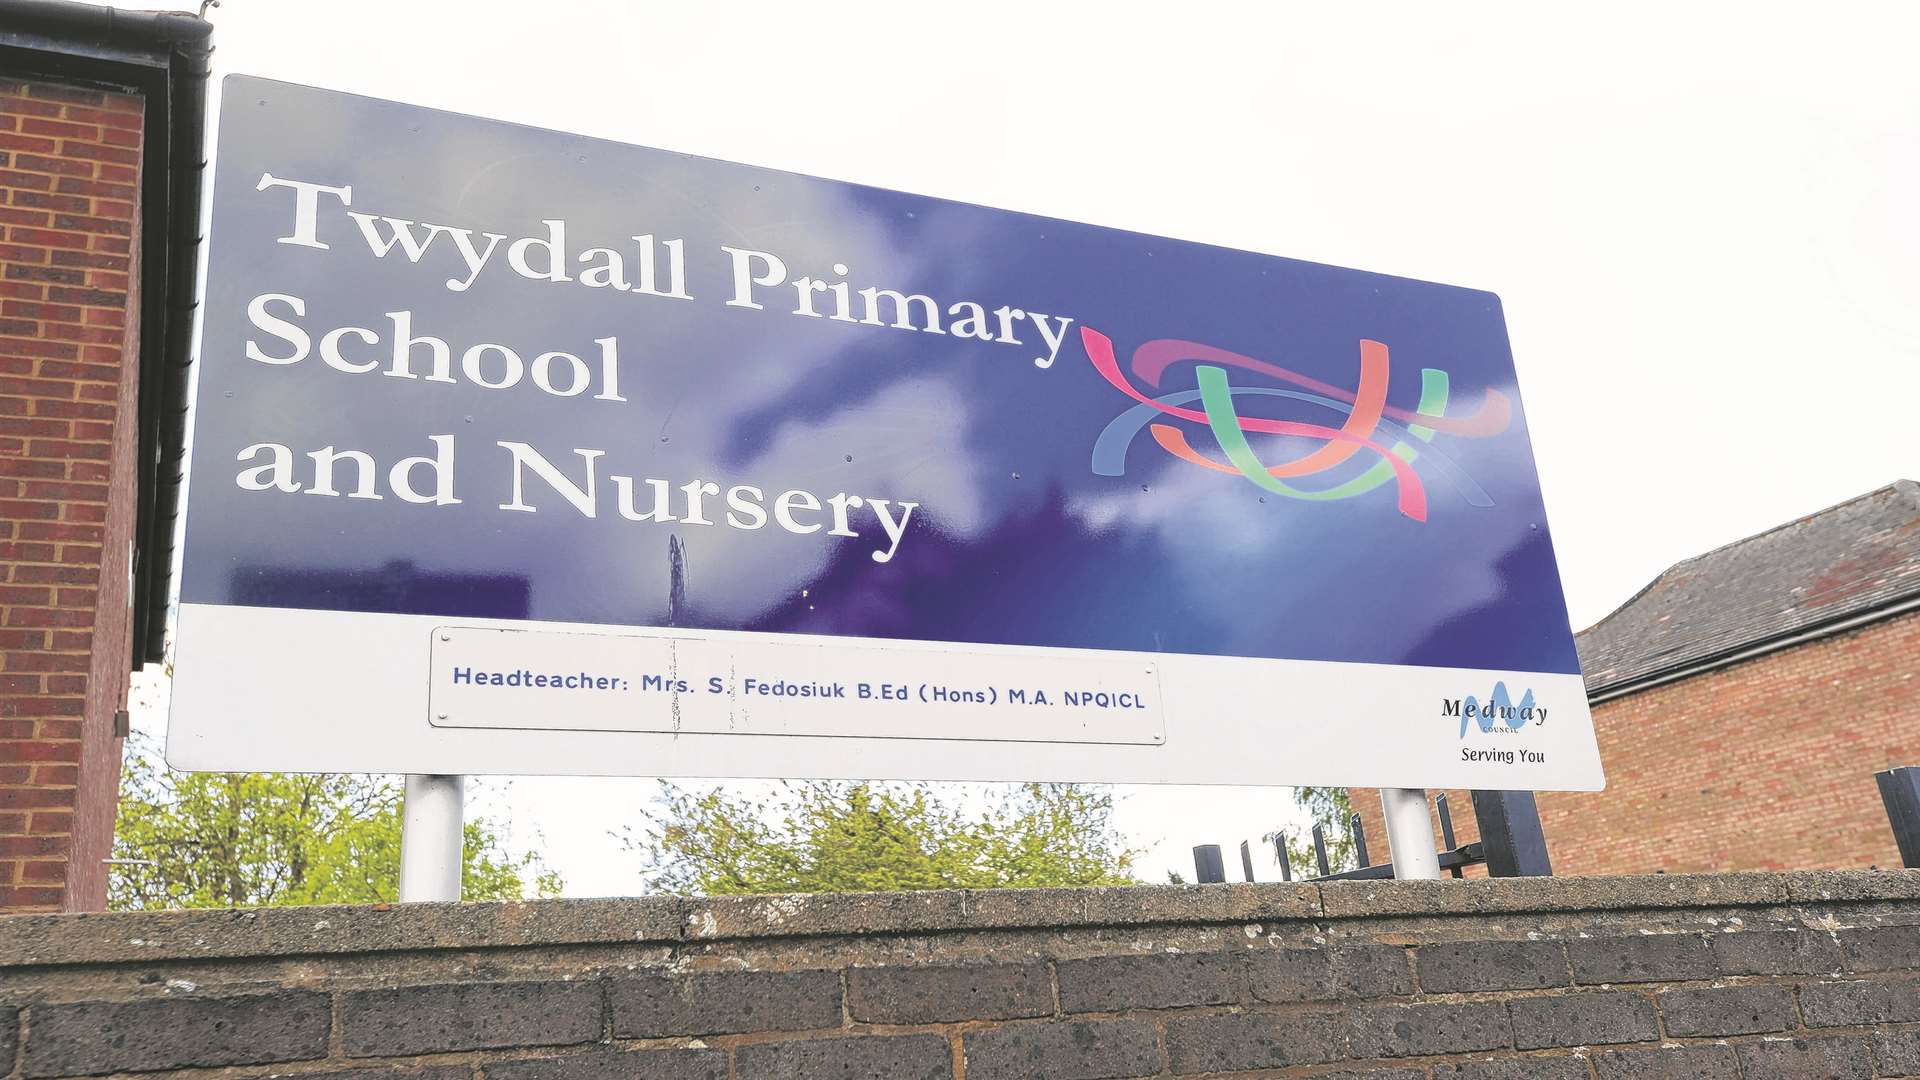 Twydall Primary School was placed in special measures in May 2014.